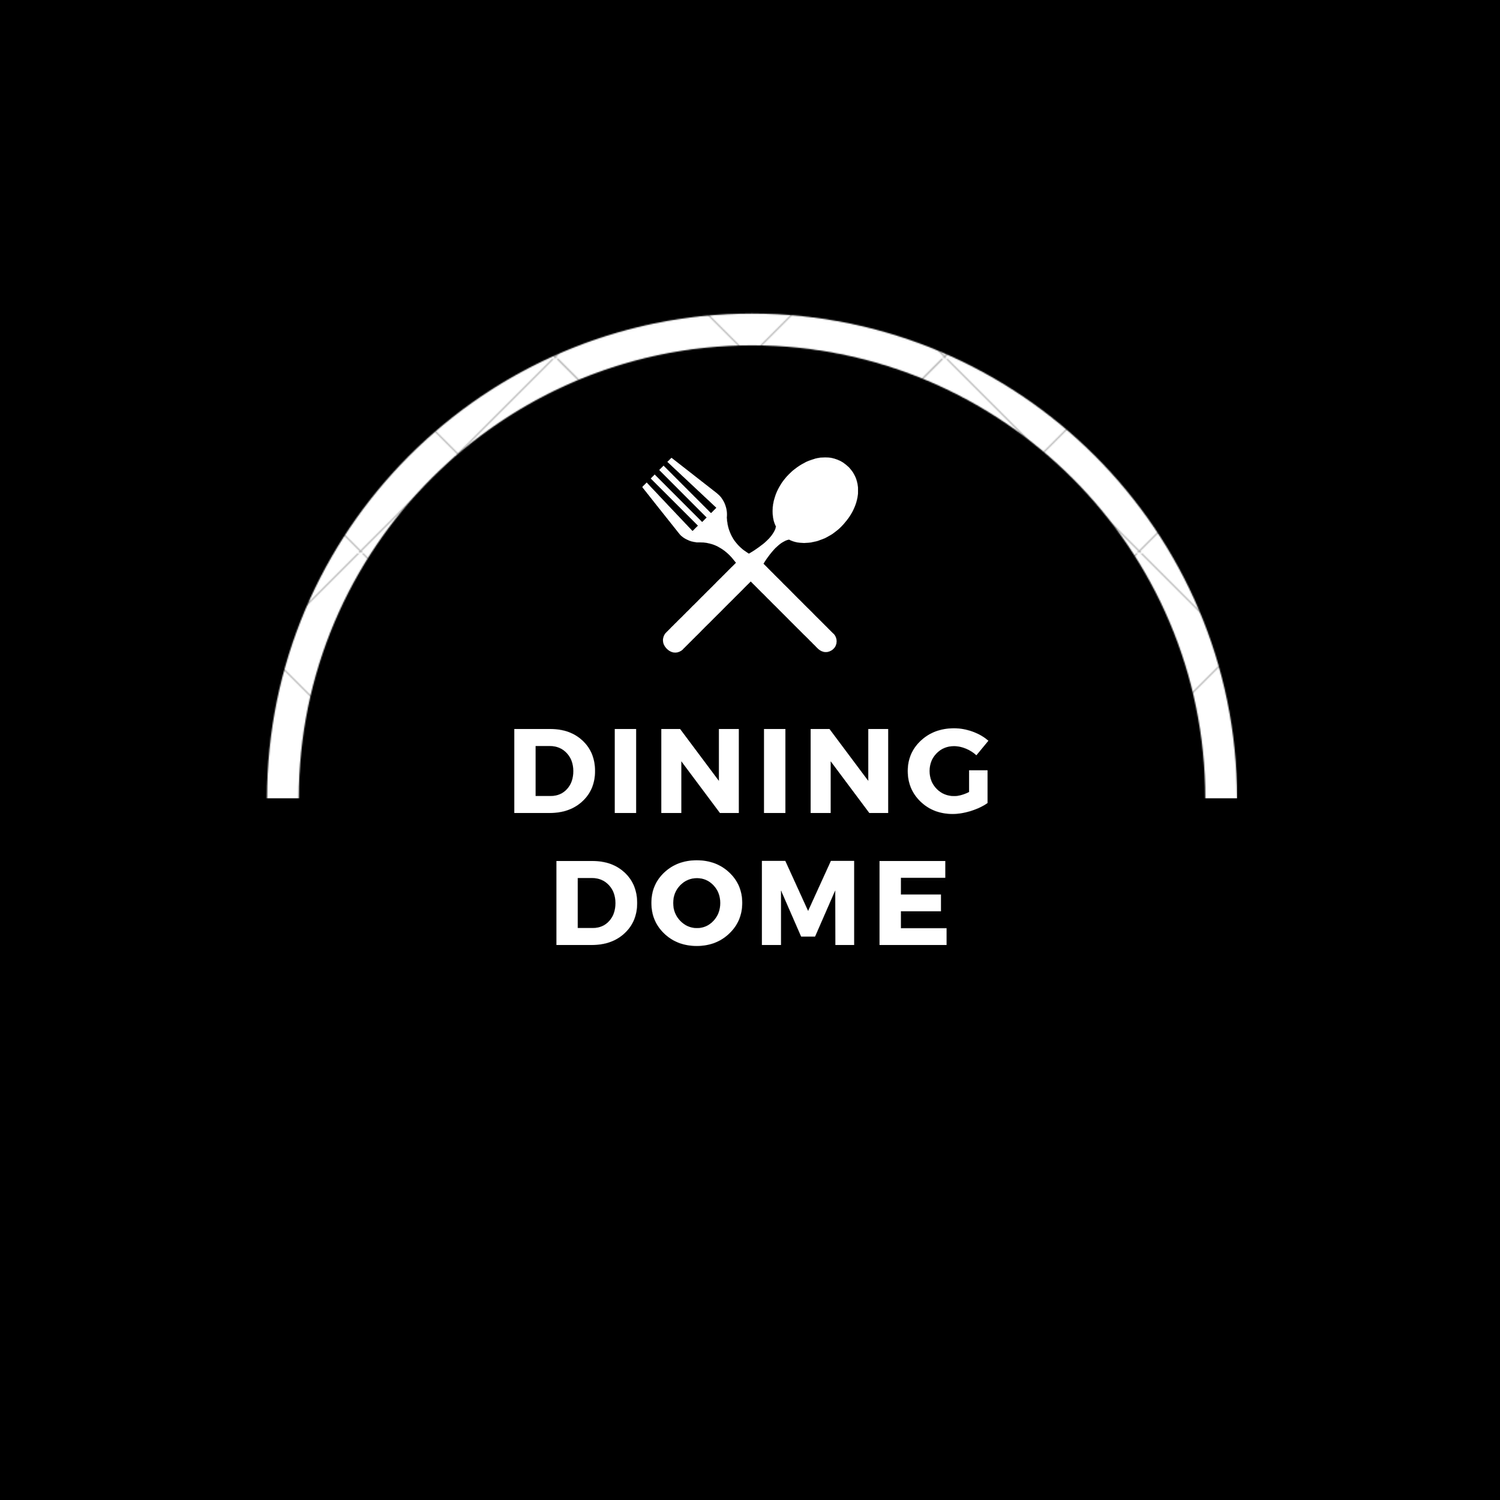 Dining Dome: Hire, Buy and Book igloos in Sydney, Melbourne, Canberra, Hobart, Adelaide